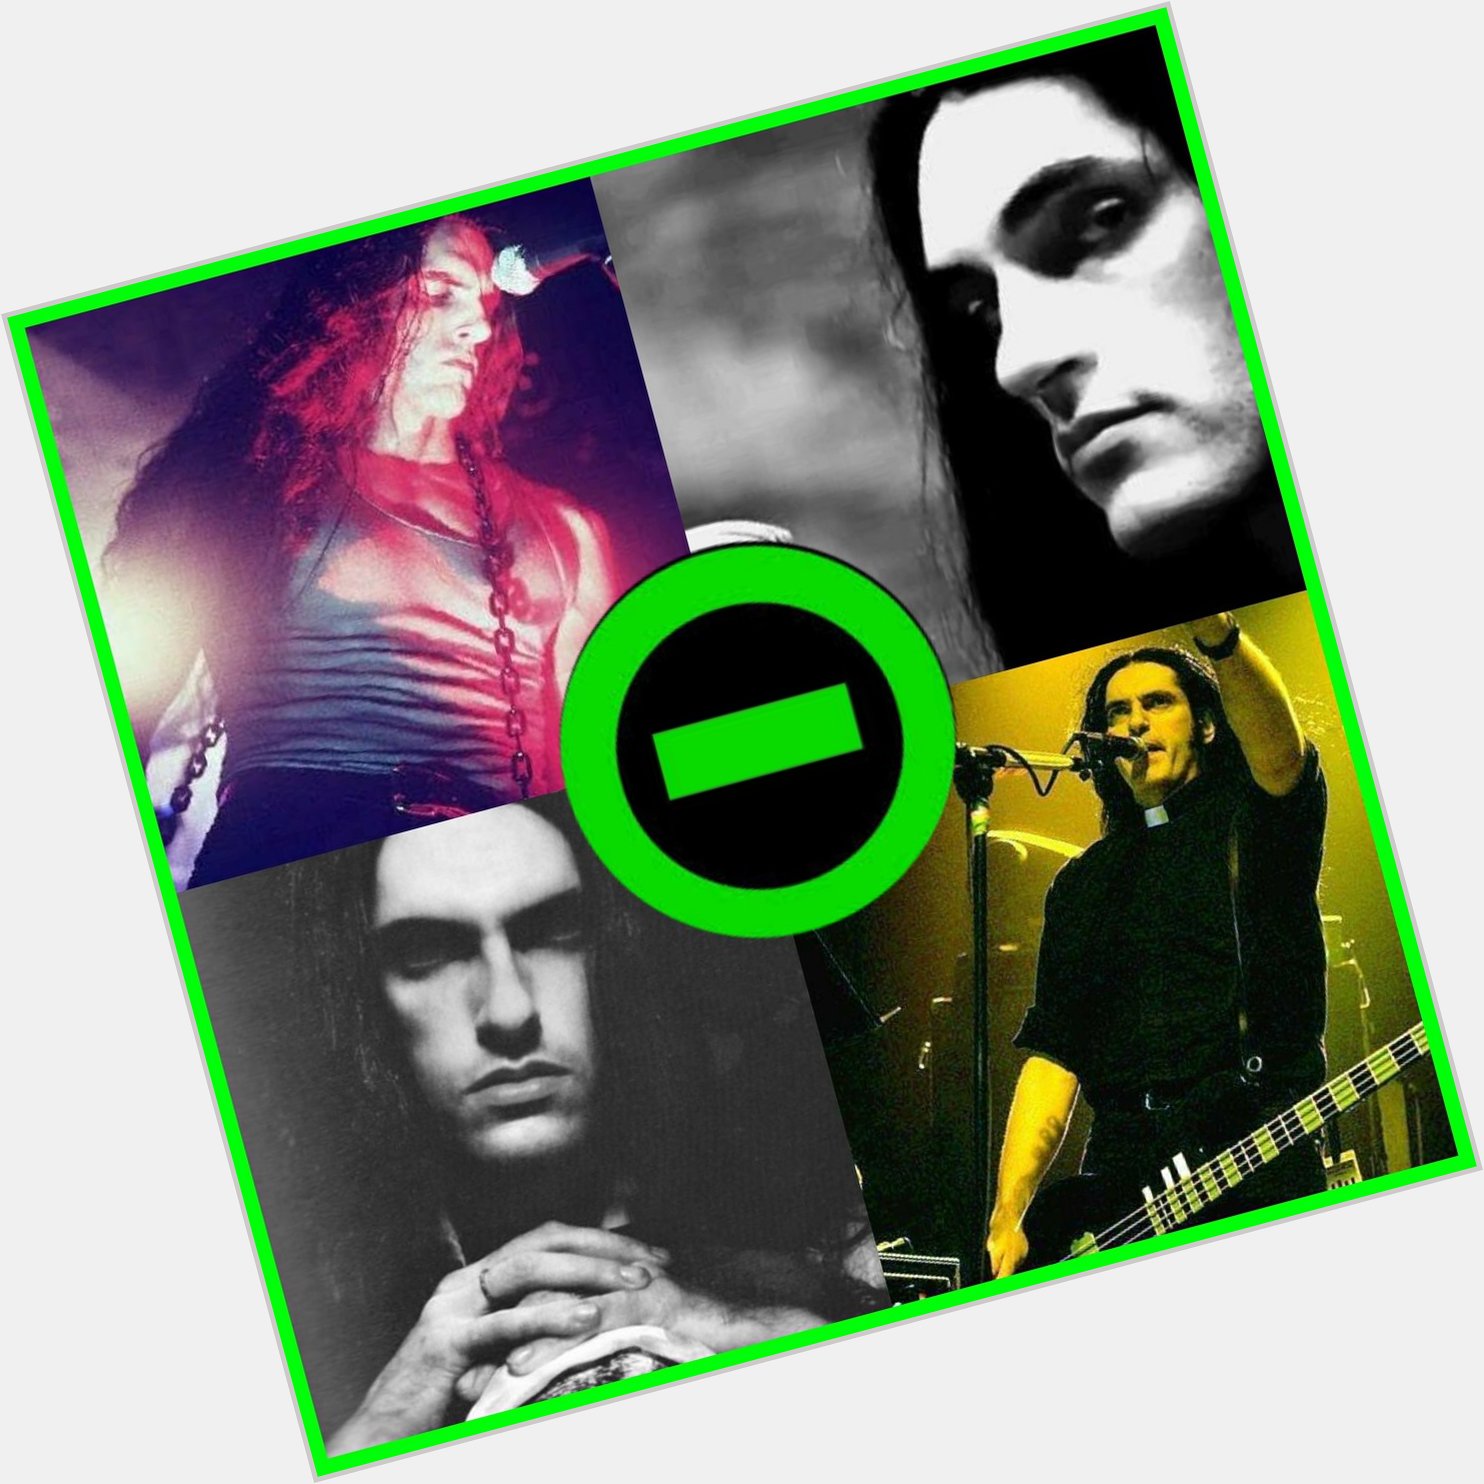 Happy birthday to the great Peter Steele Forever in our hearts.  